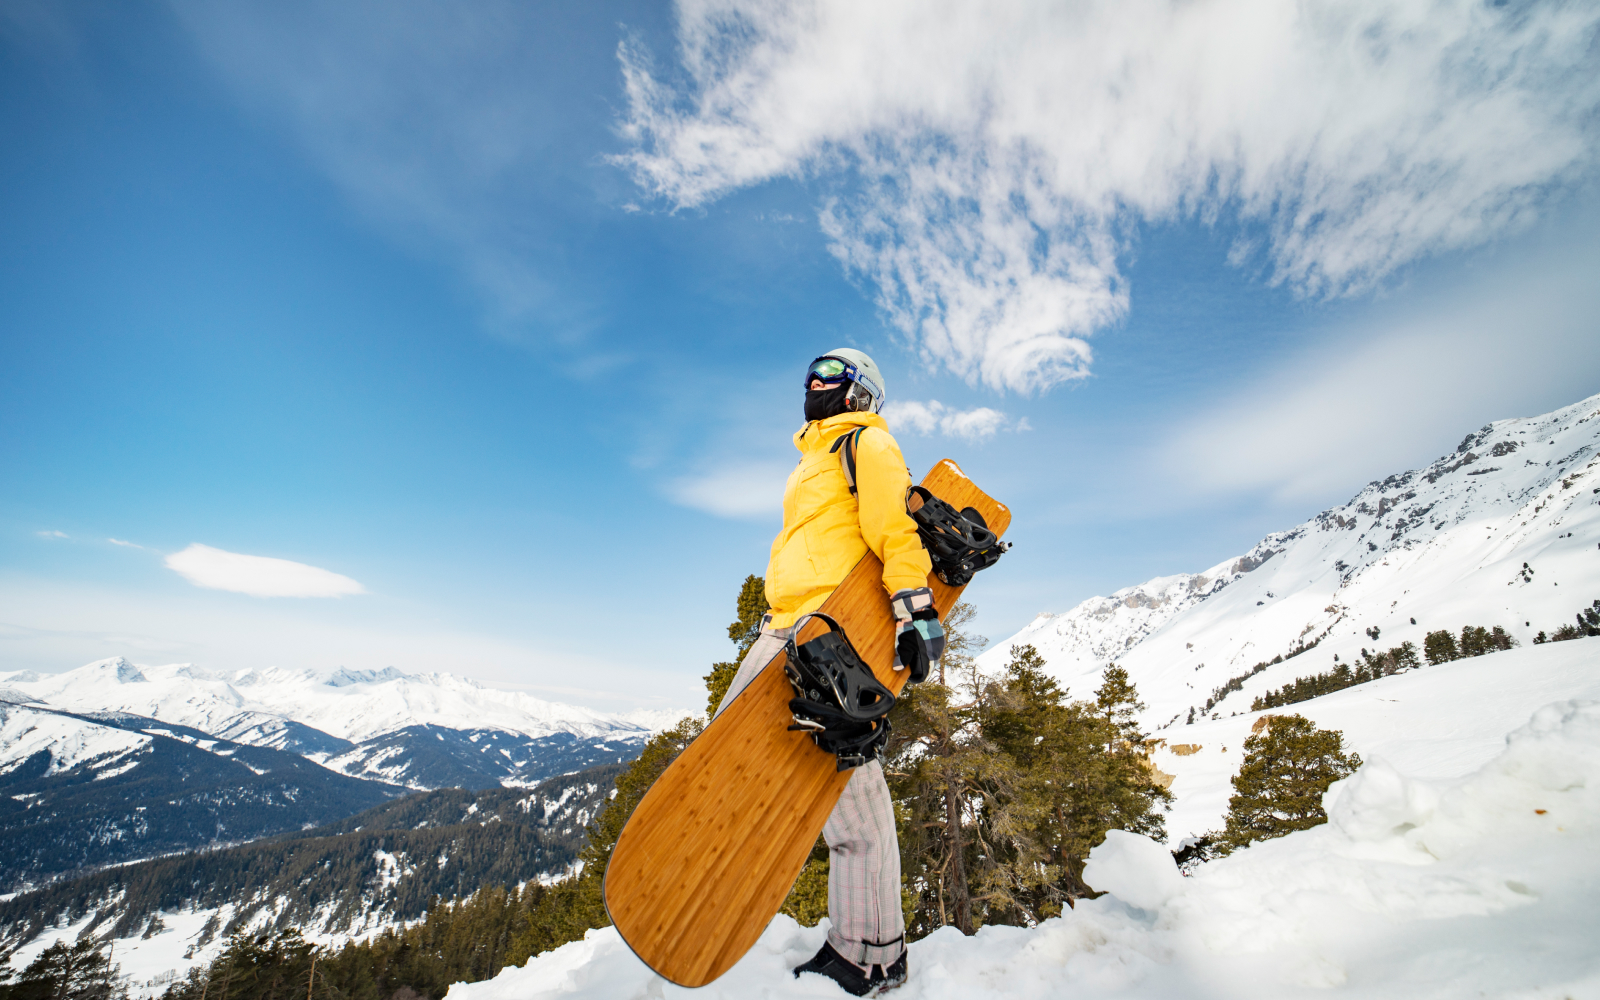 5 snowparks for snowboarding in Italy